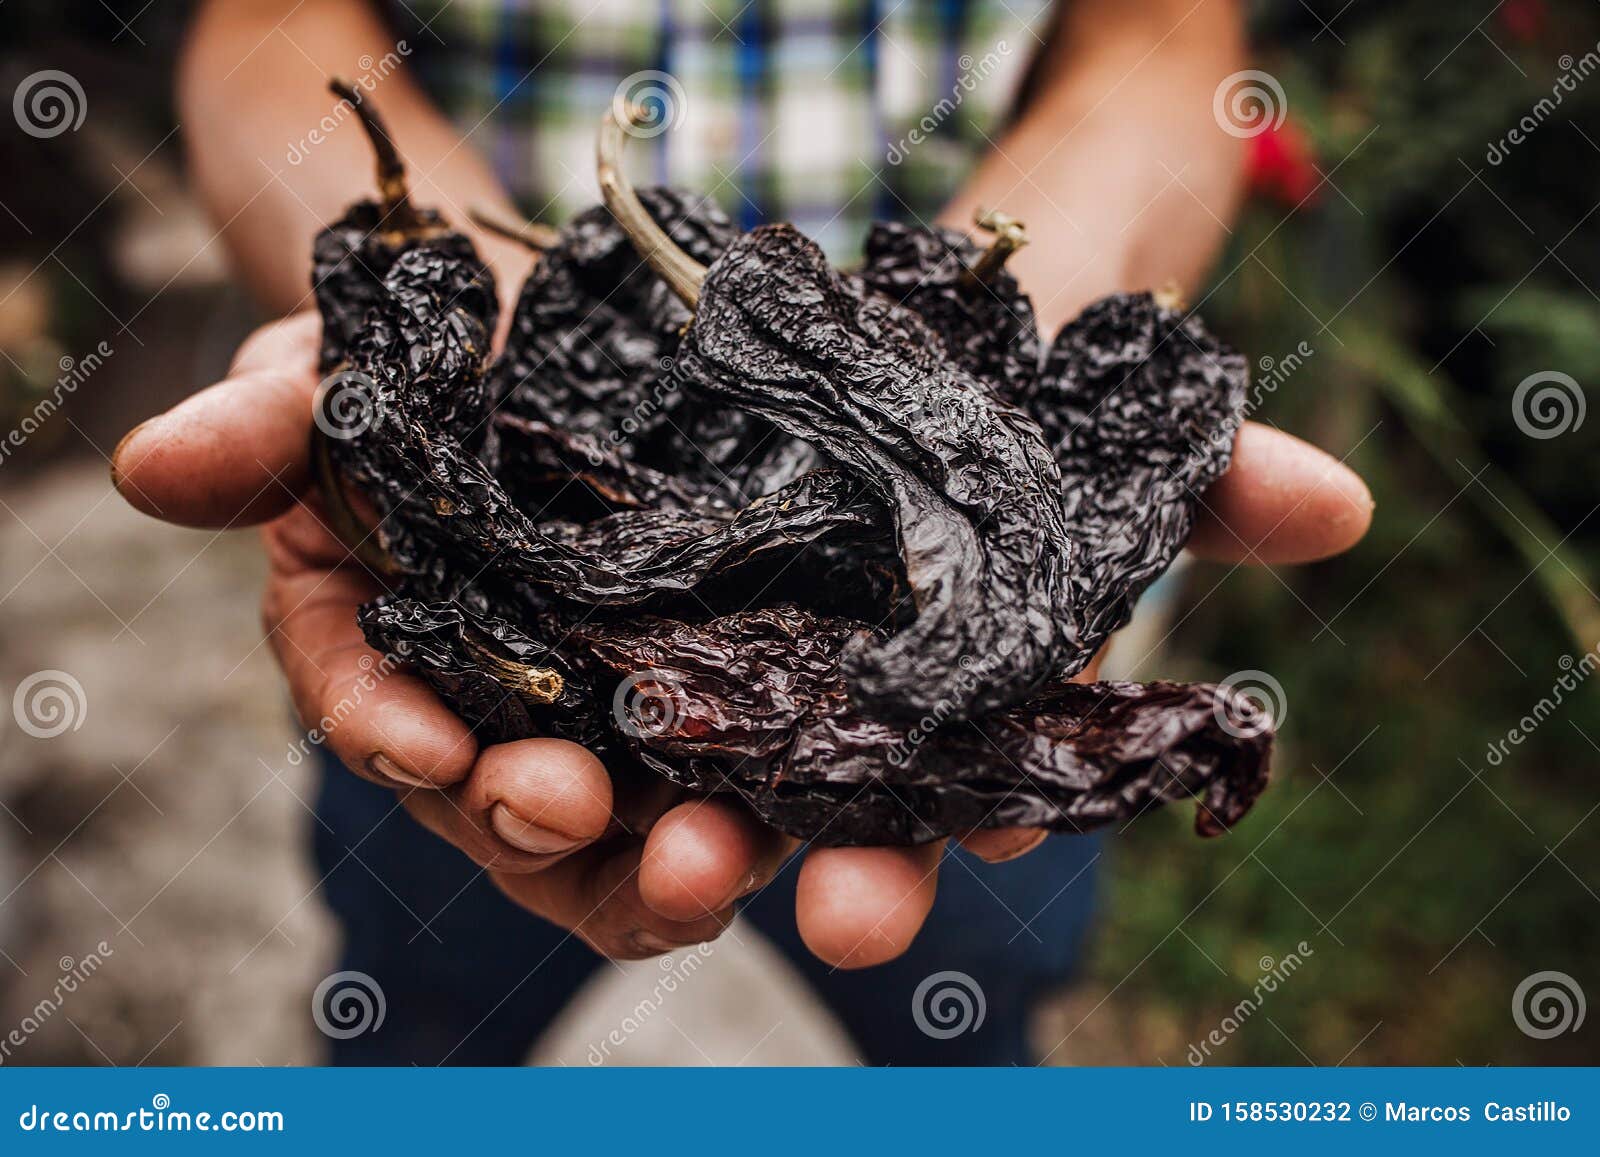 chile ancho, mexican dried chili pepper, assortment of chili peppers in farmer hands in mexico